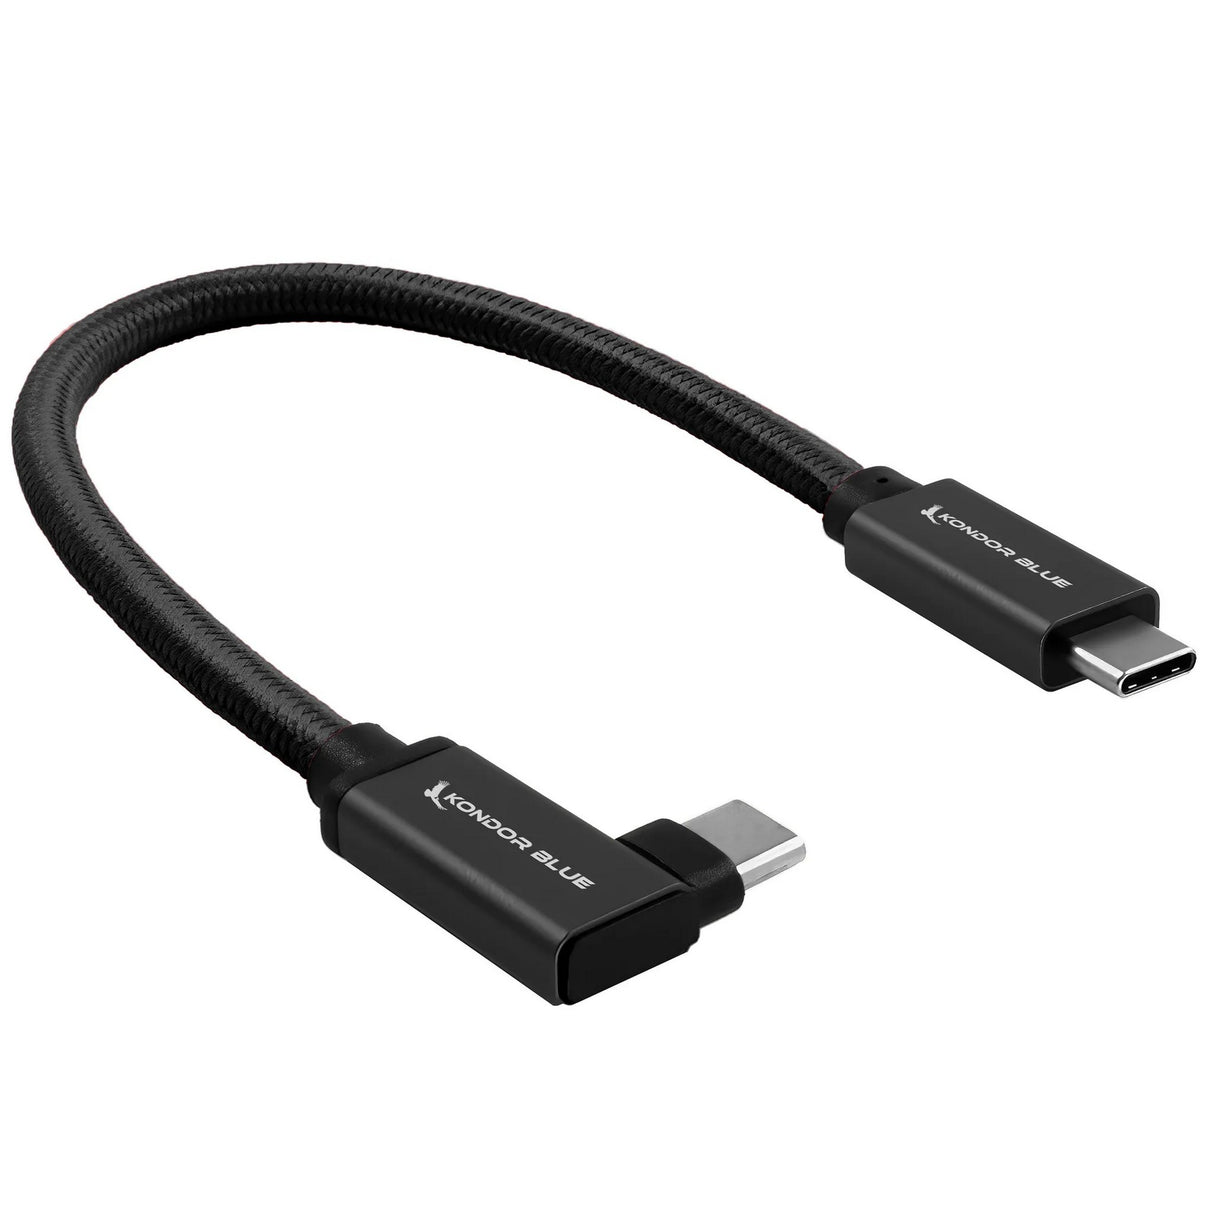 Kondor Blue USB C to USB C High Speed Cable for Samsung T5 T7 SSD, Right Angle, Raven Black